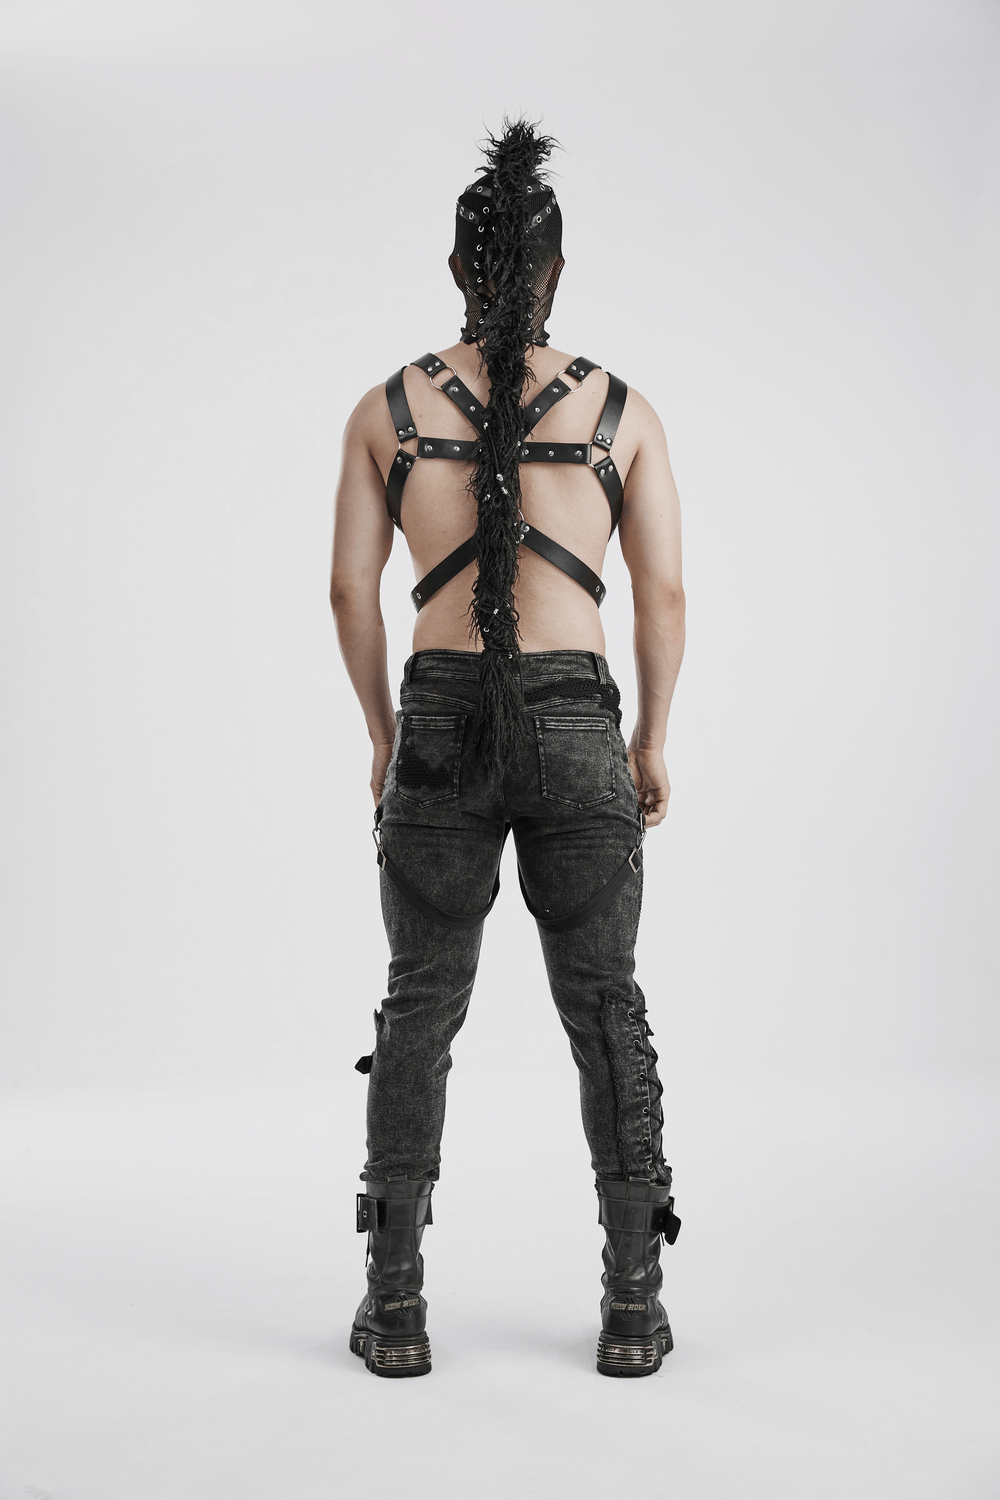 Edgy Black Mesh Hood with Mohawk Ponytail in Punk Style